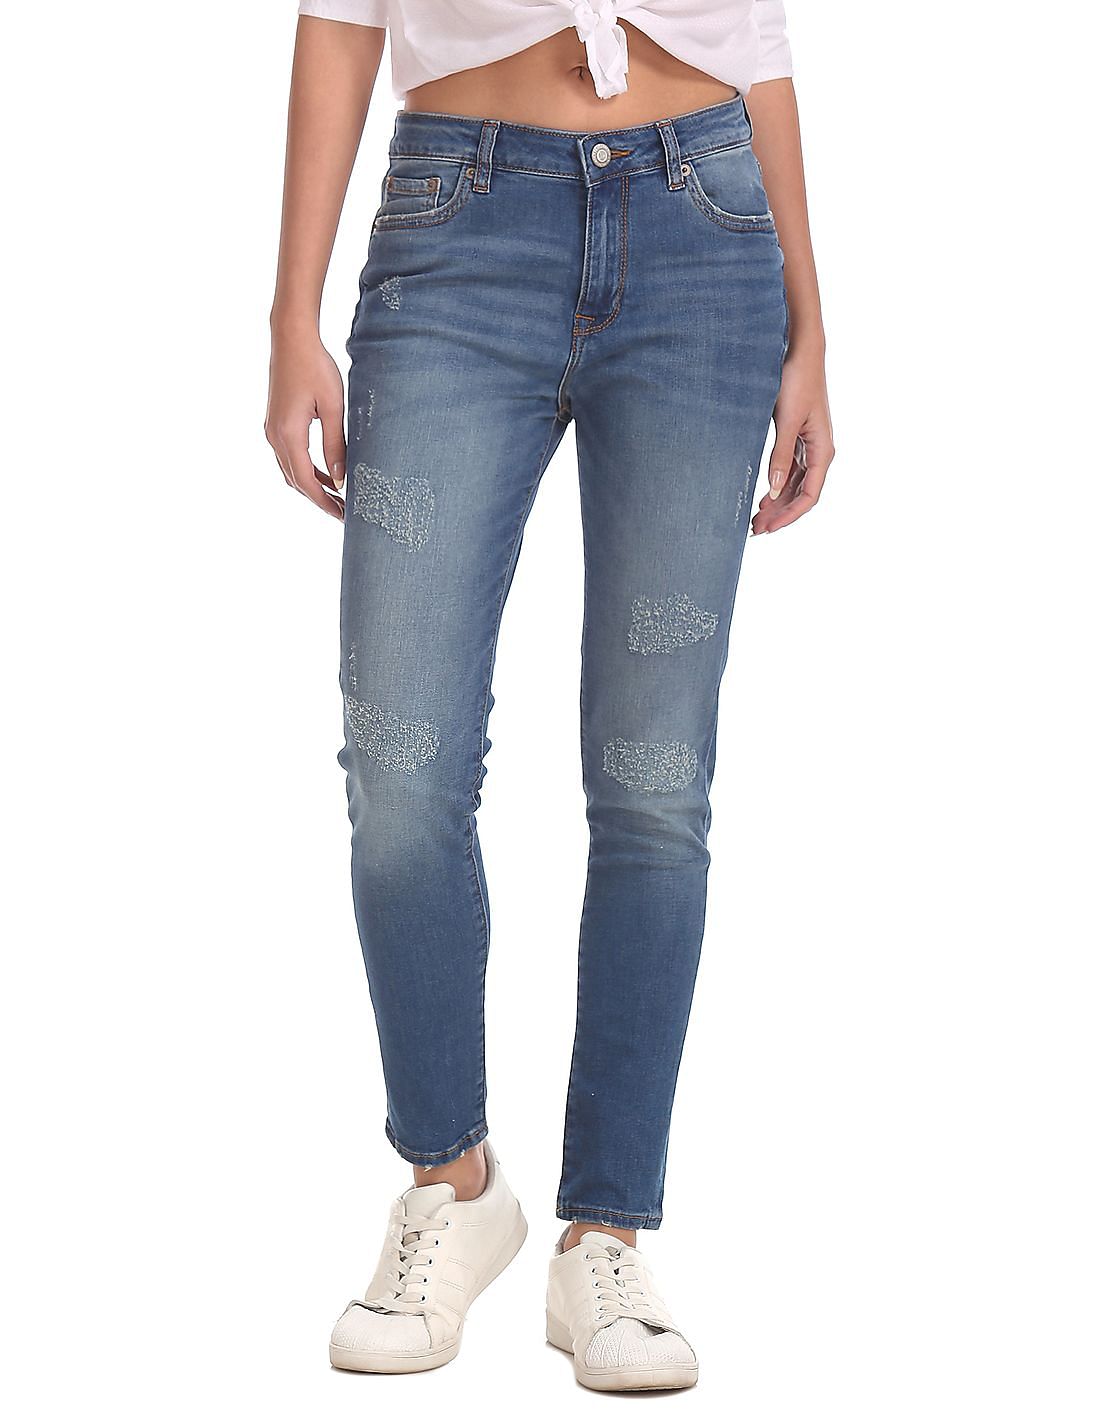 Buy Aeropostale Low Rise Jegging Fit Jeans - NNNOW.com